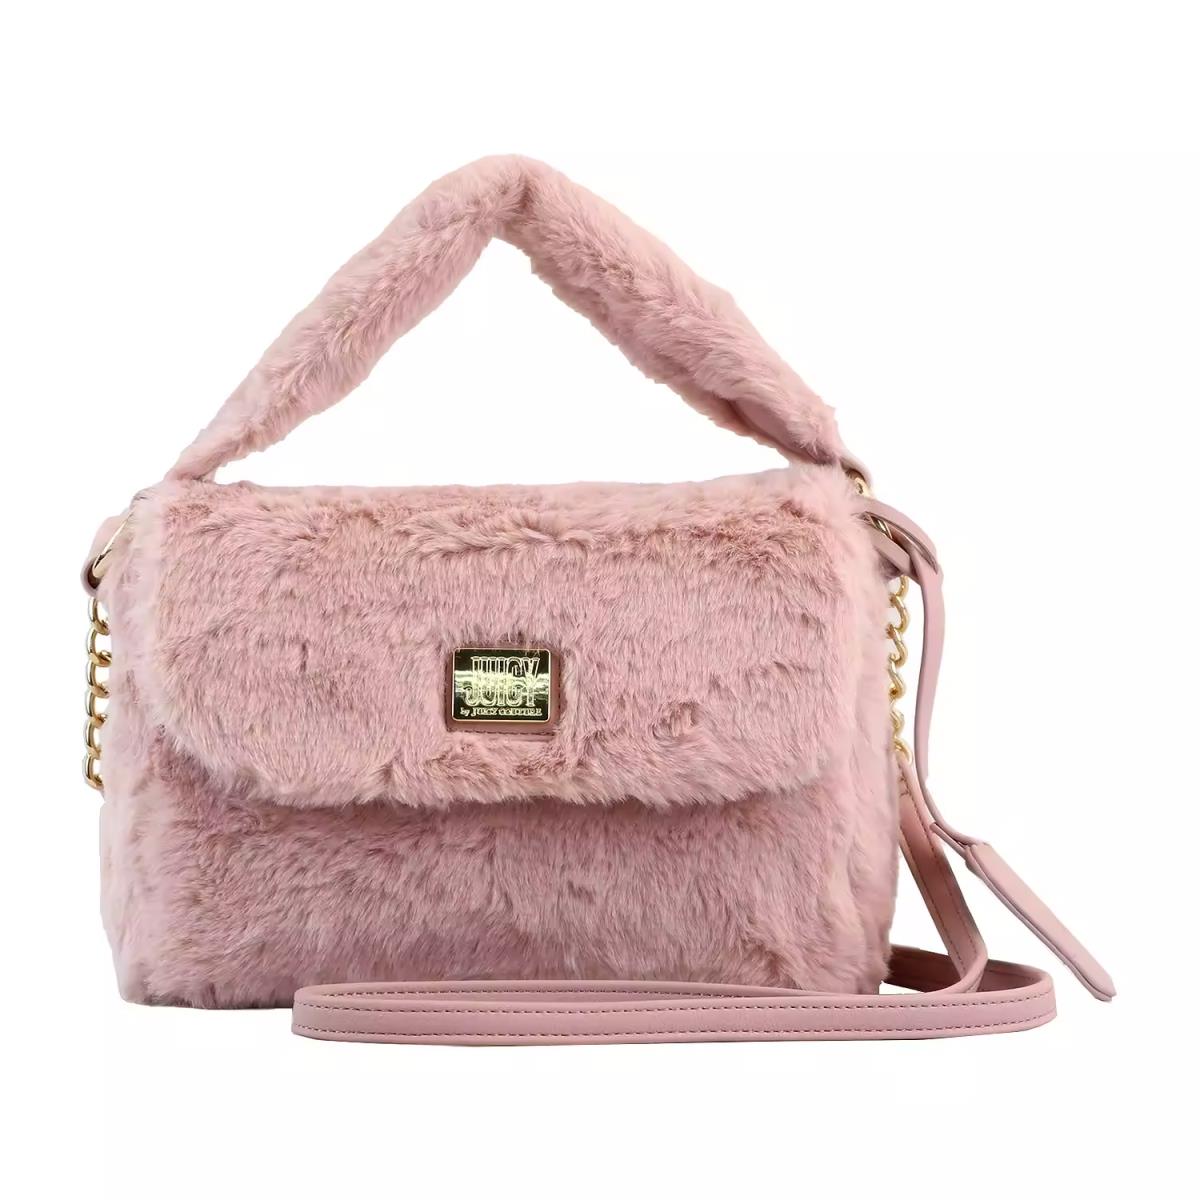 Juicy Couture Pink Luxadelic Flap Crossbody Bag - Handle/Strap: Pink, Hardware: Gold, Exterior: Pink